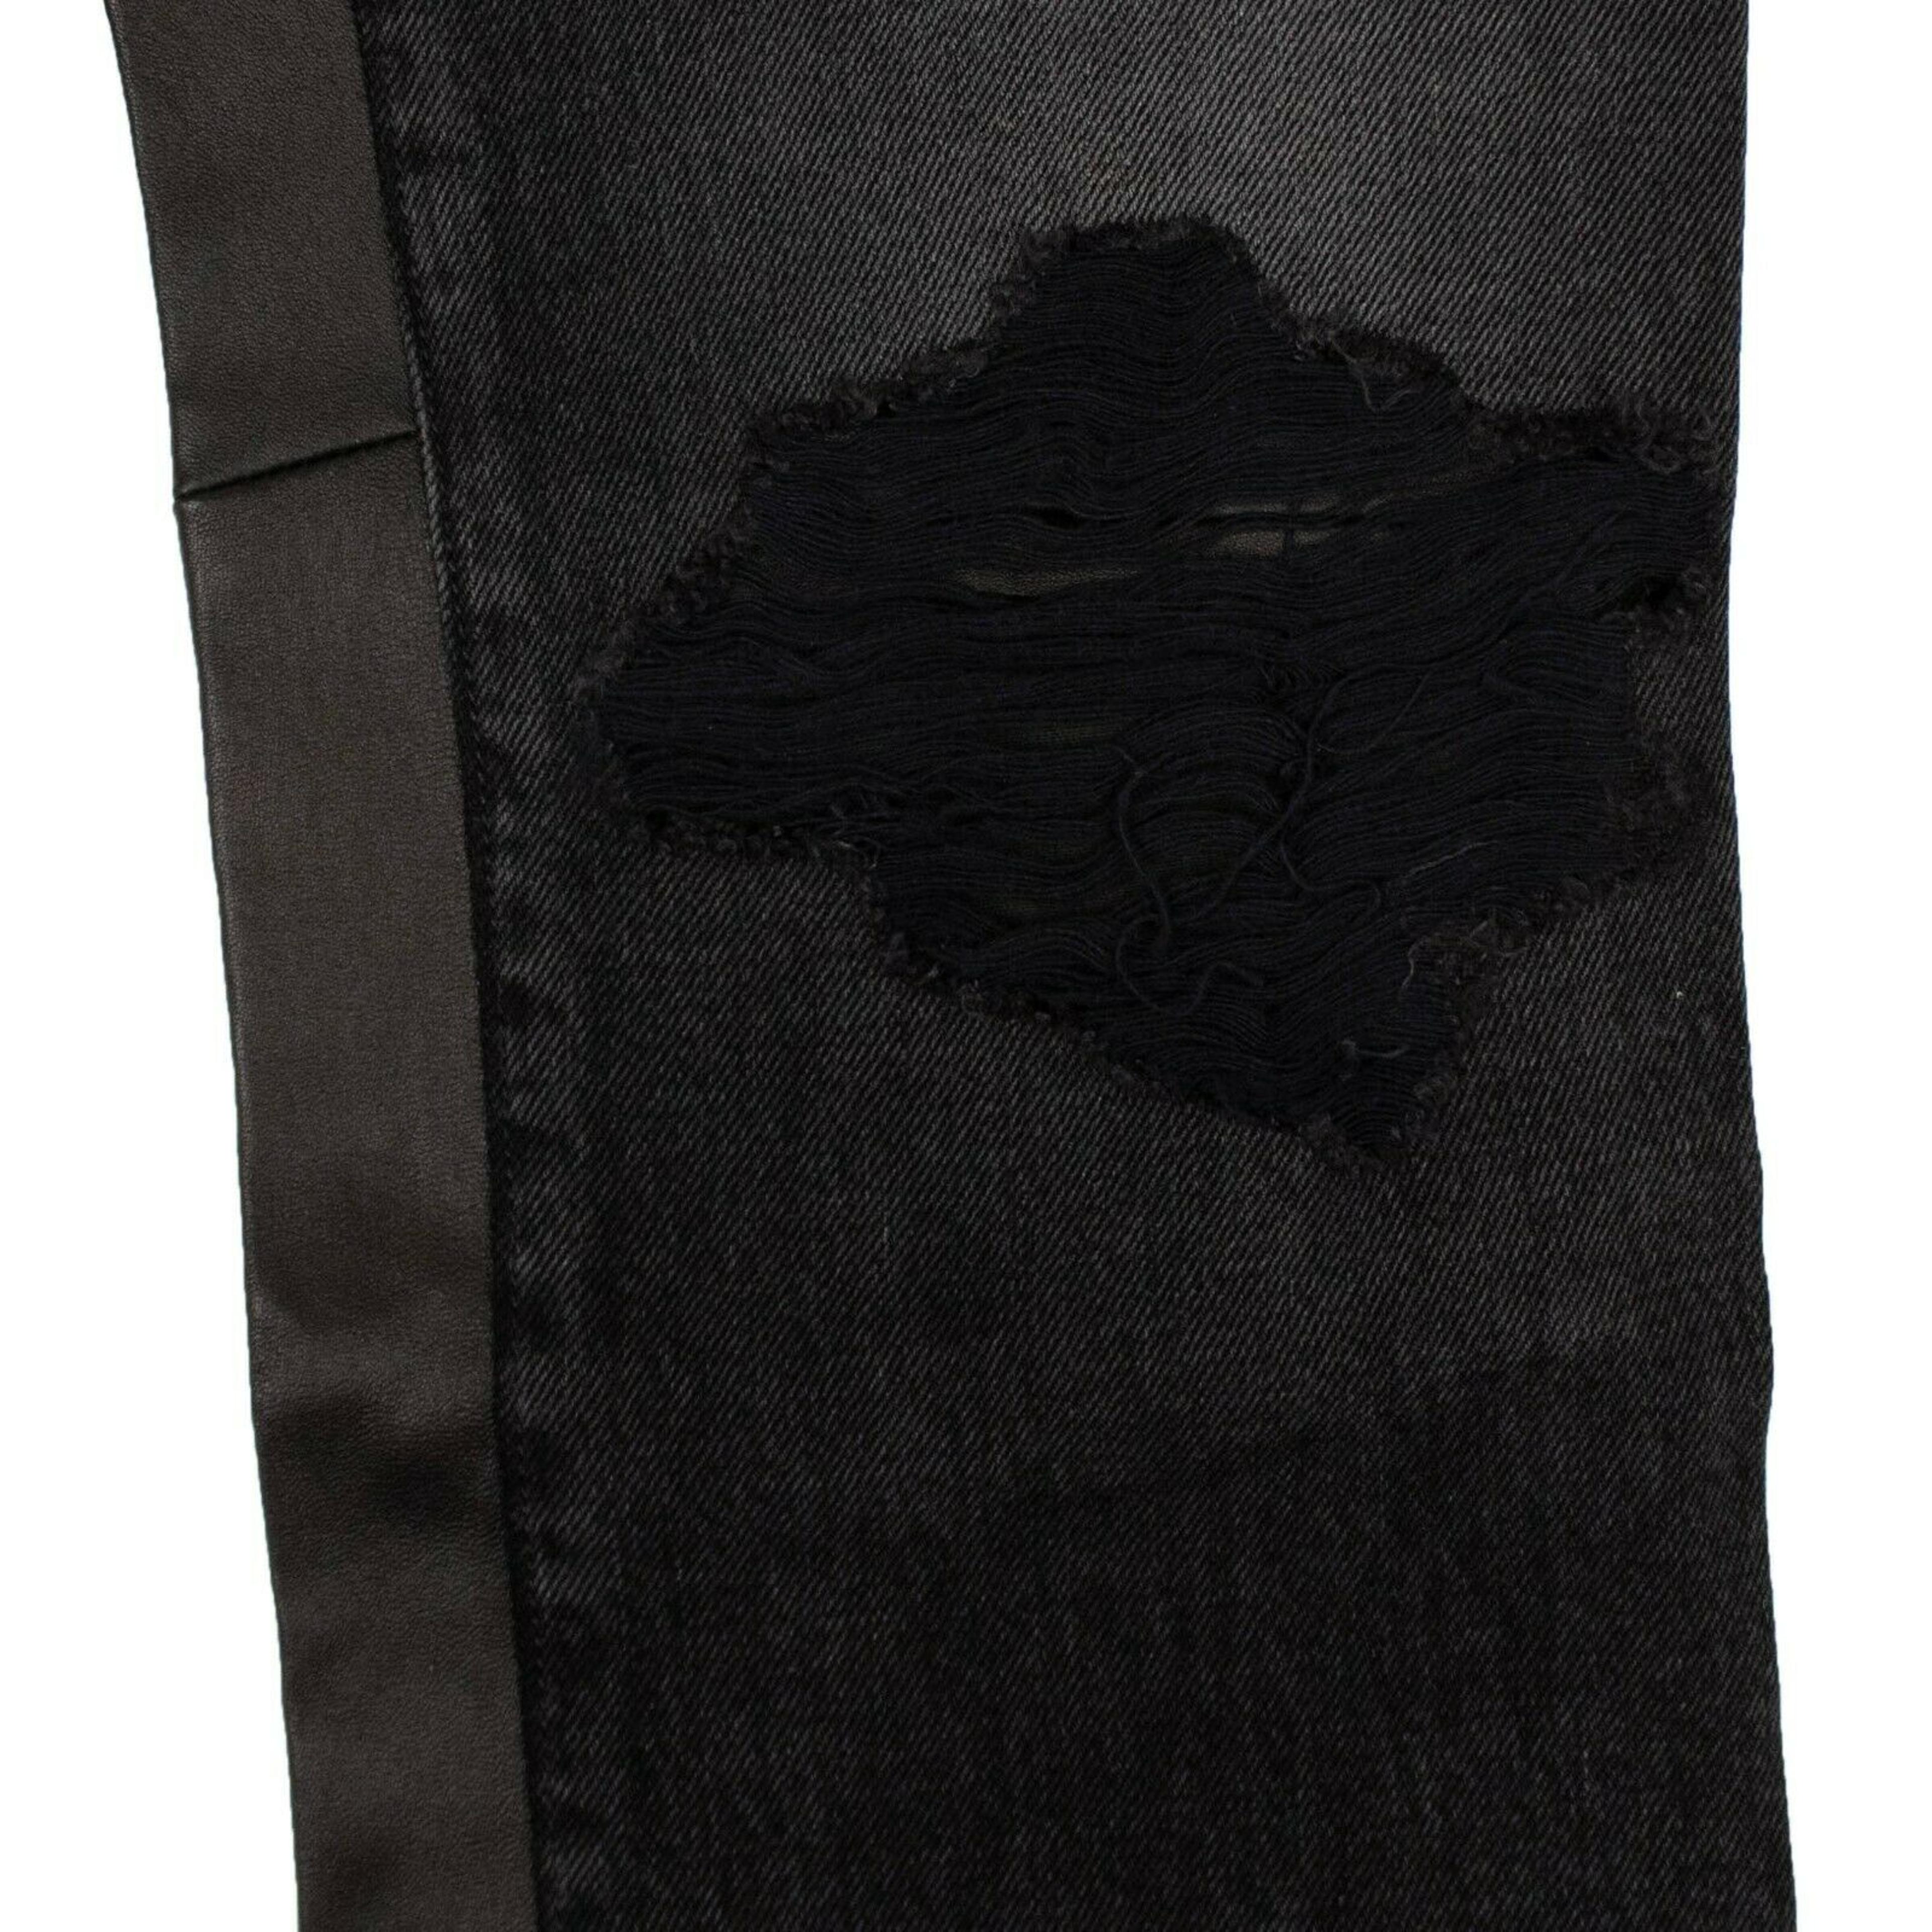 Alternate View 2 of Women's Black Leather Hybrid Cropped Jeans